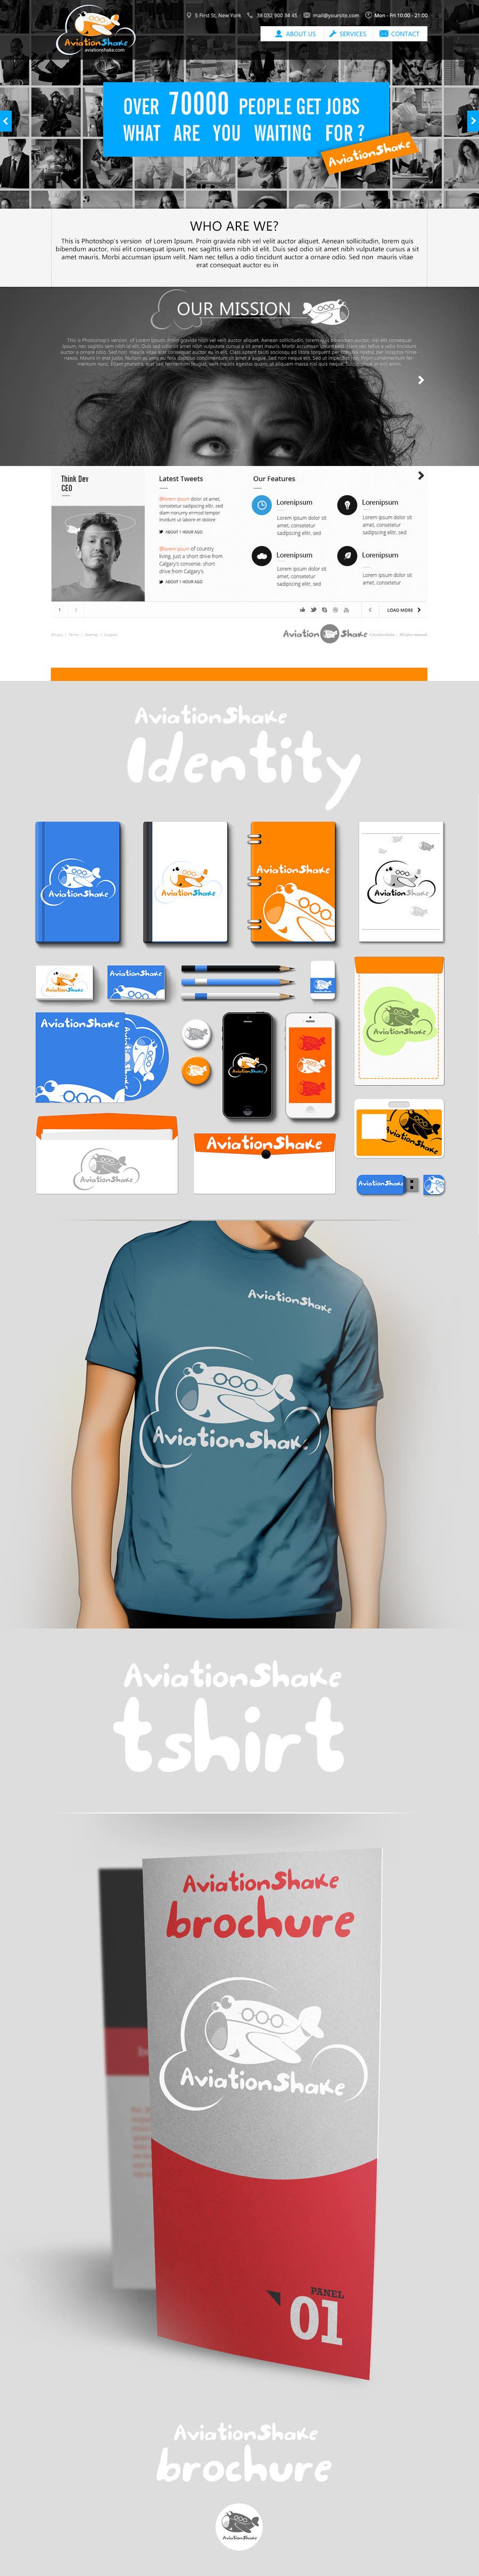 Proposition n°215 du concours                                                 Develop an Identity (logo, font, style, website mockup) for AviationShake
                                            